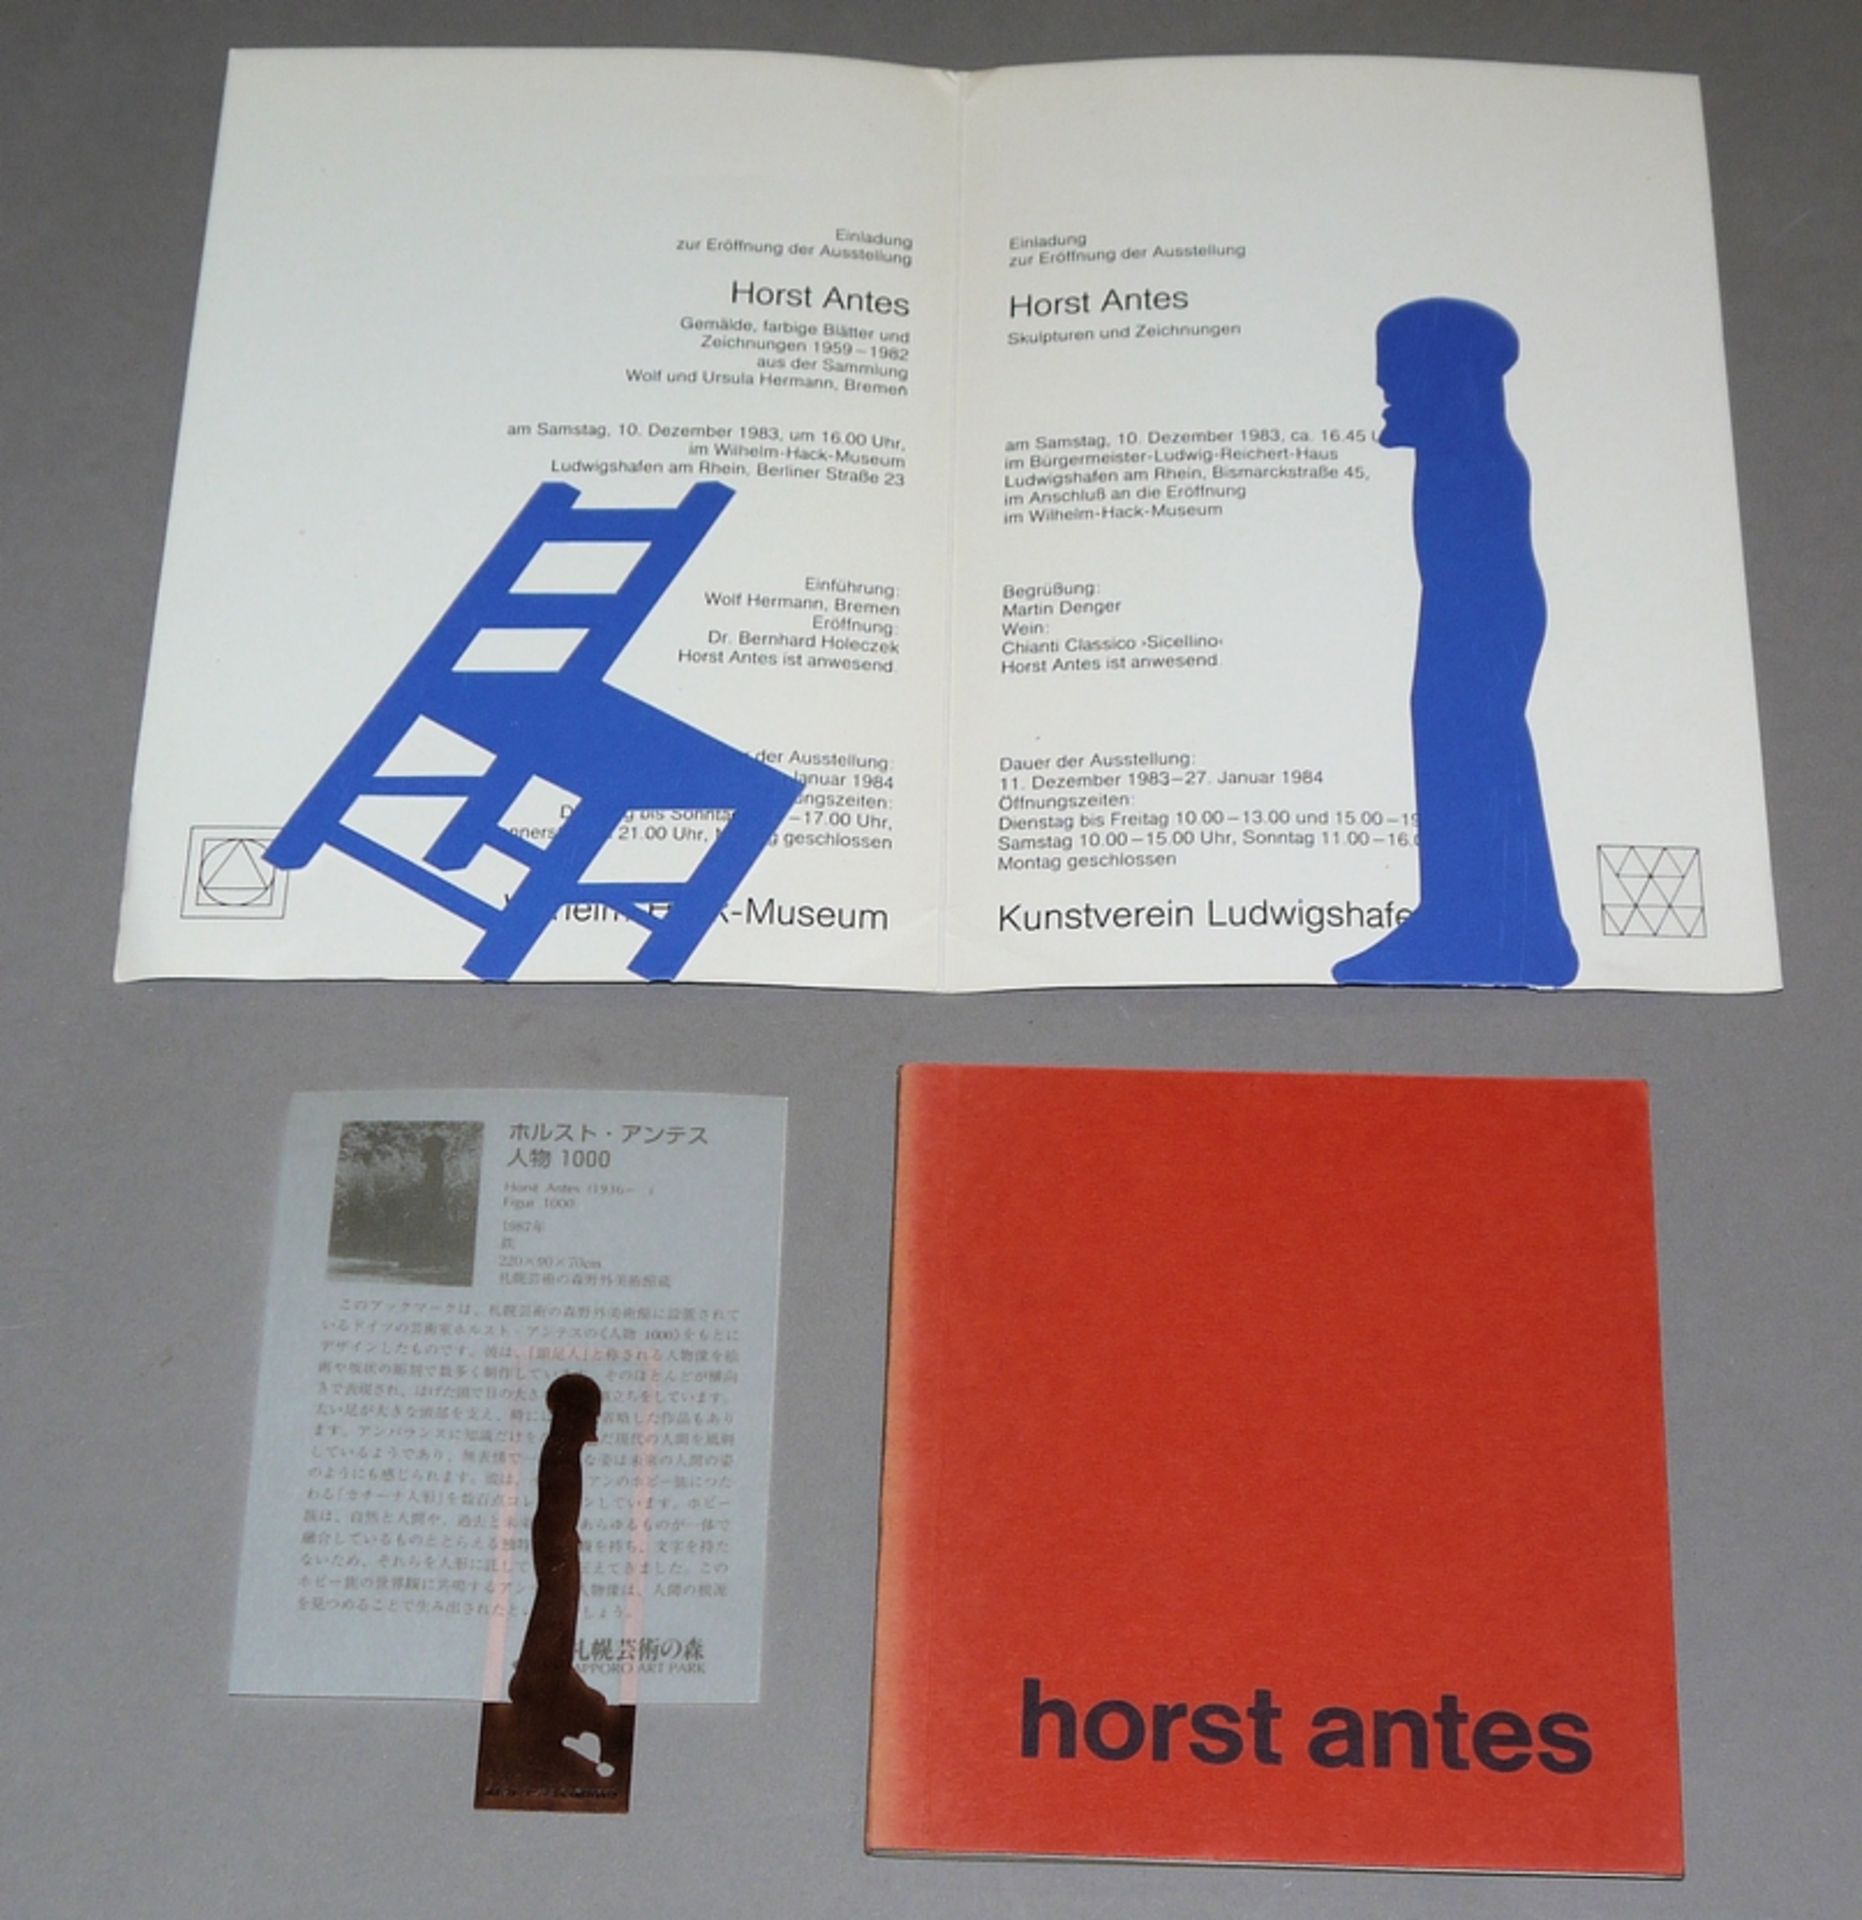 Horst Antes, "Initiales", small artist's book, Galerie Renate Boukes, 1960 as well as artistically